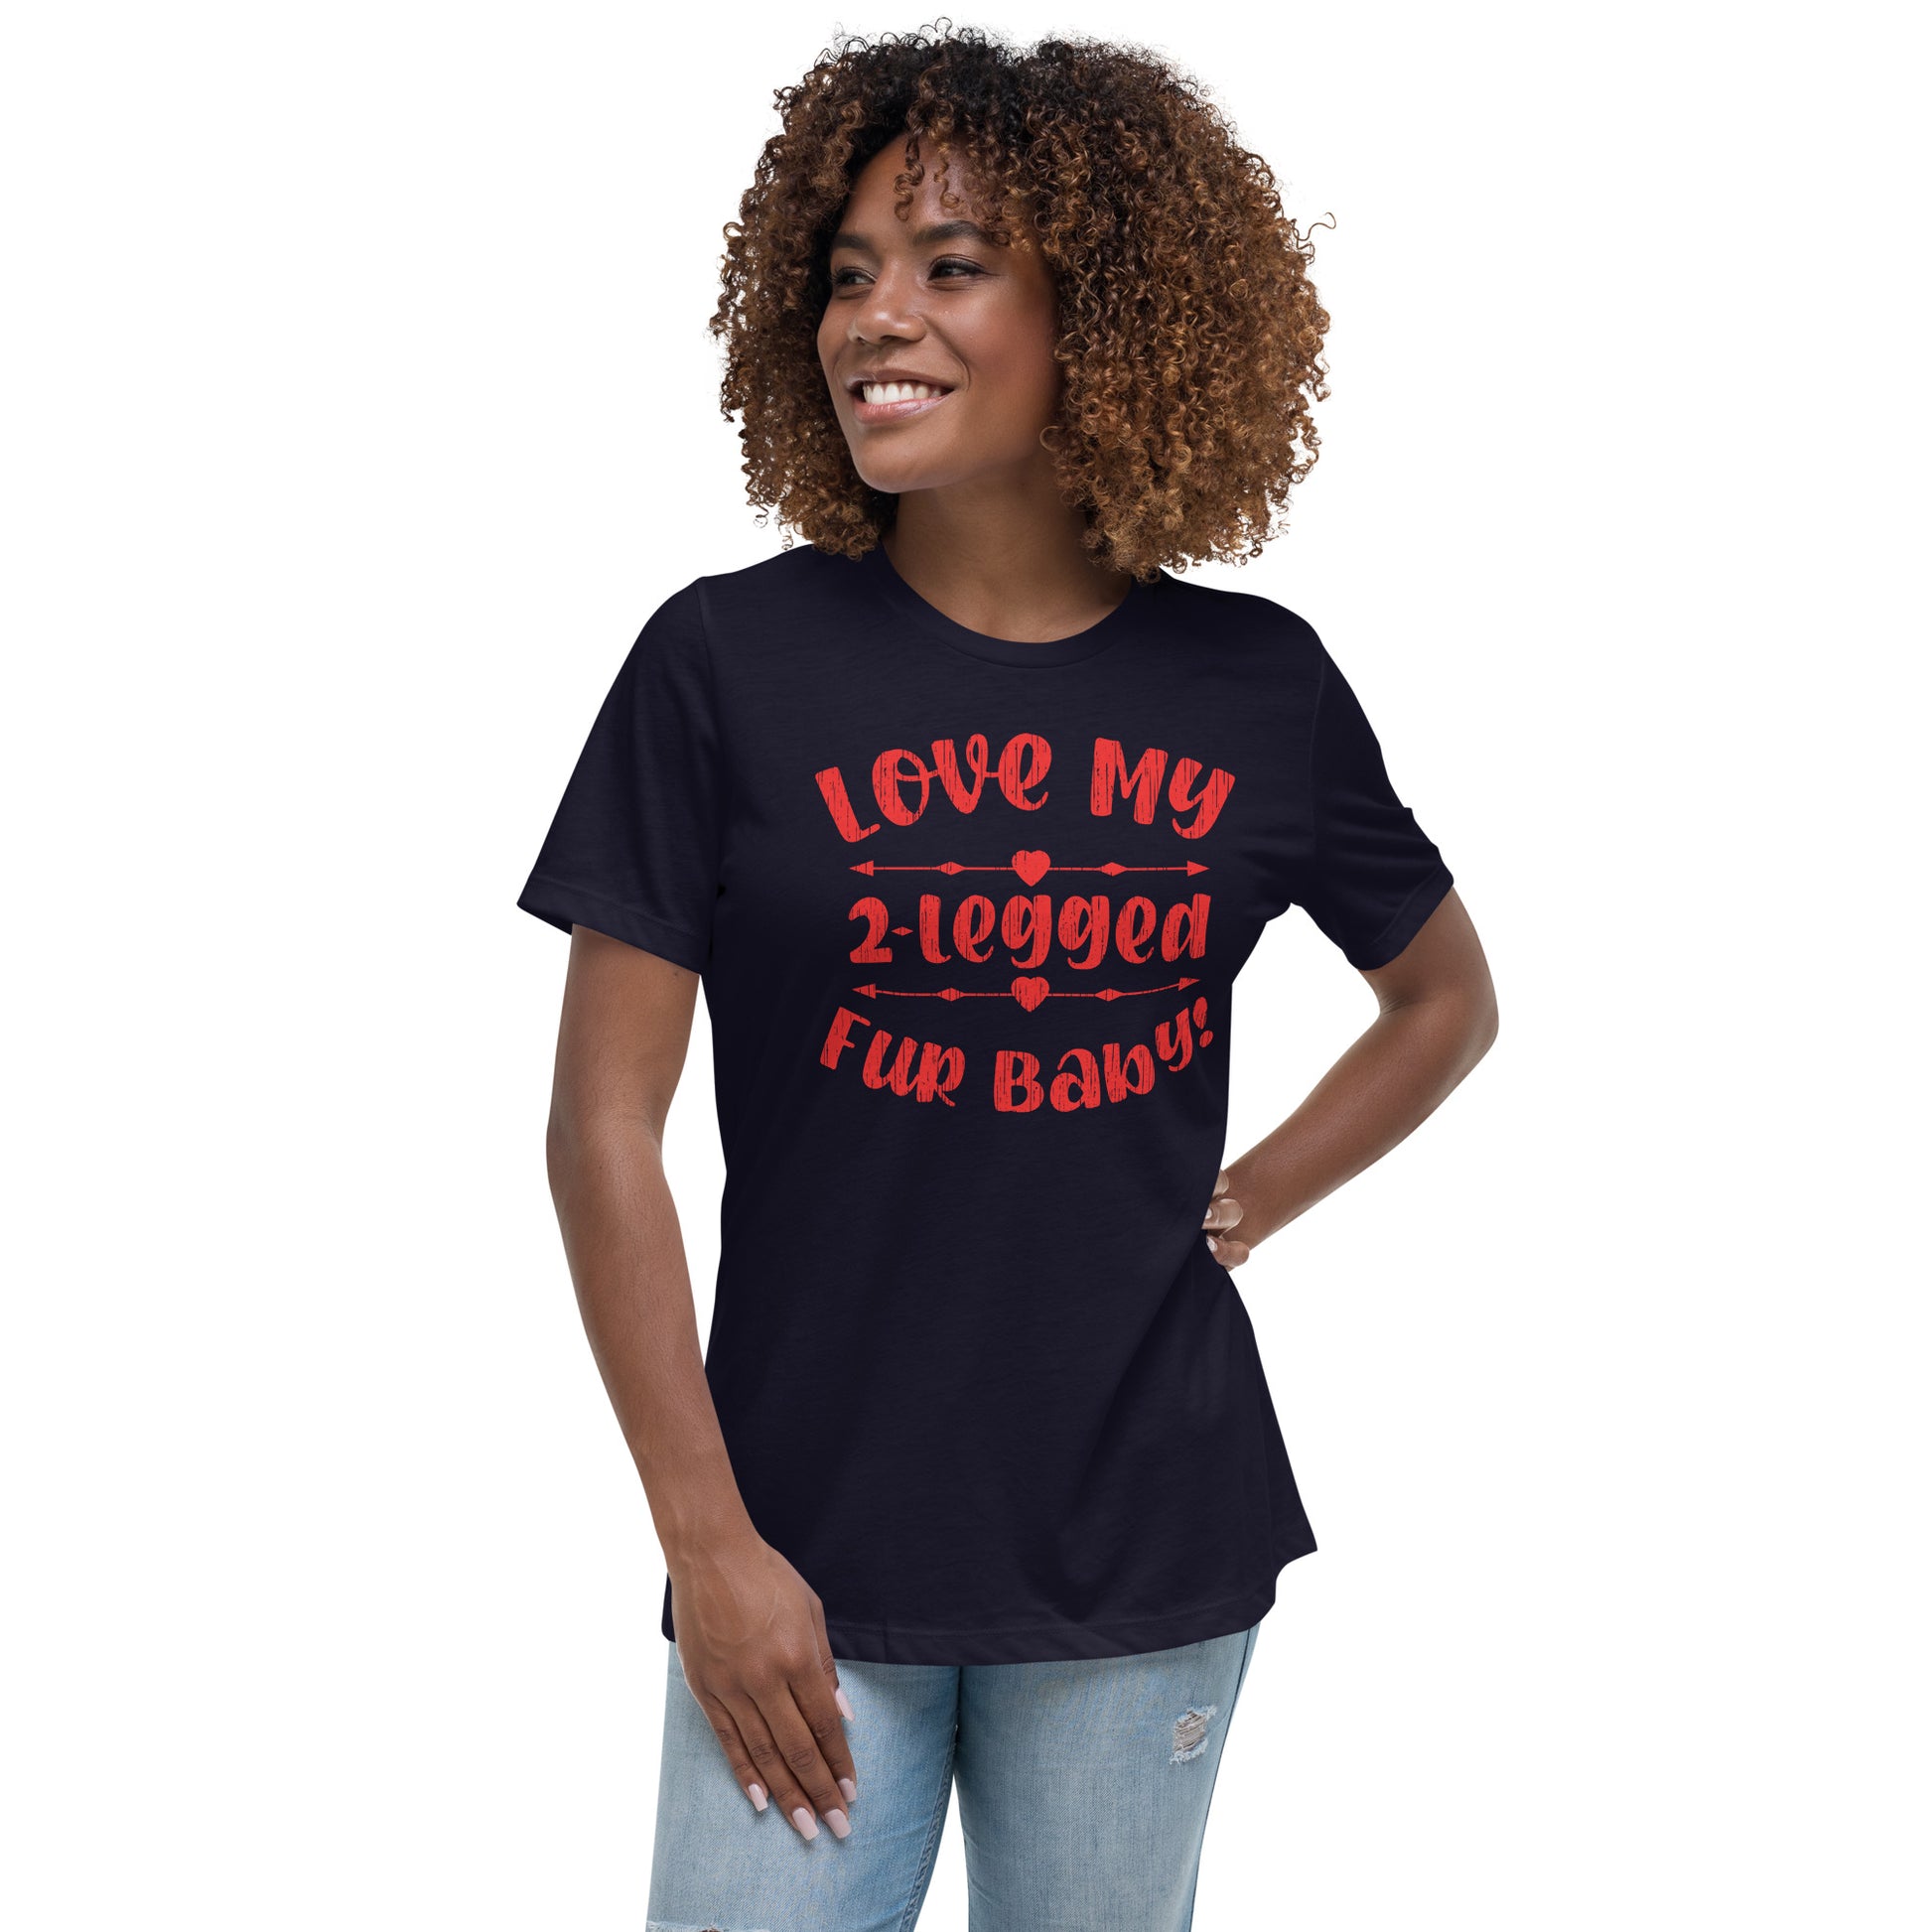 Love my 2-legged fur baby women’s relaxed fit t-shirts by Dog Artistry